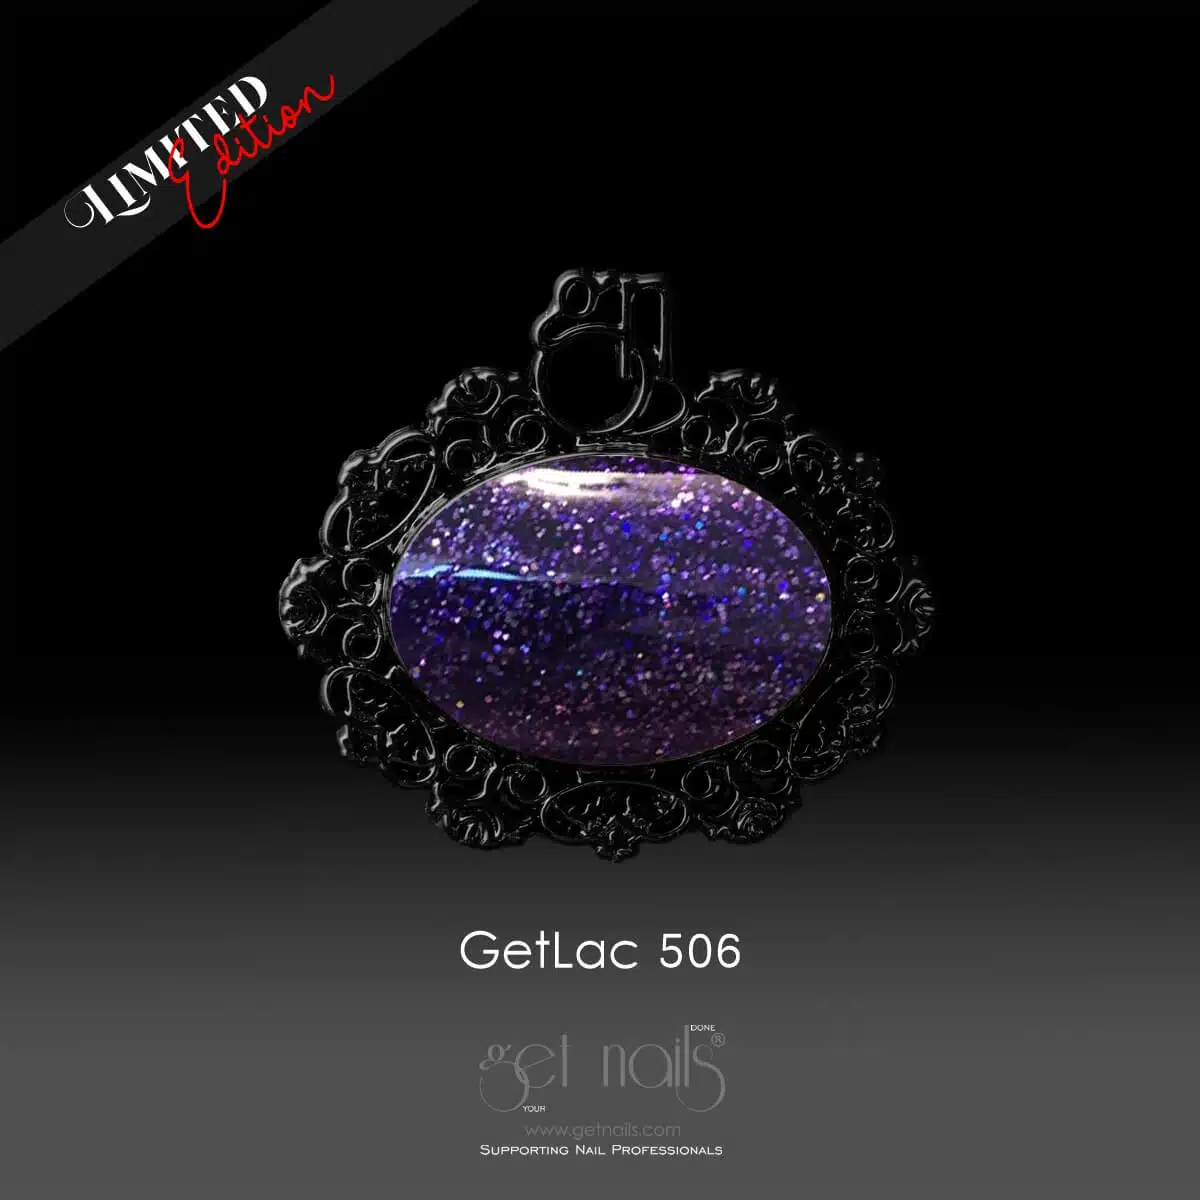 Get Nails Austria — GetLac 506 Limited Edition